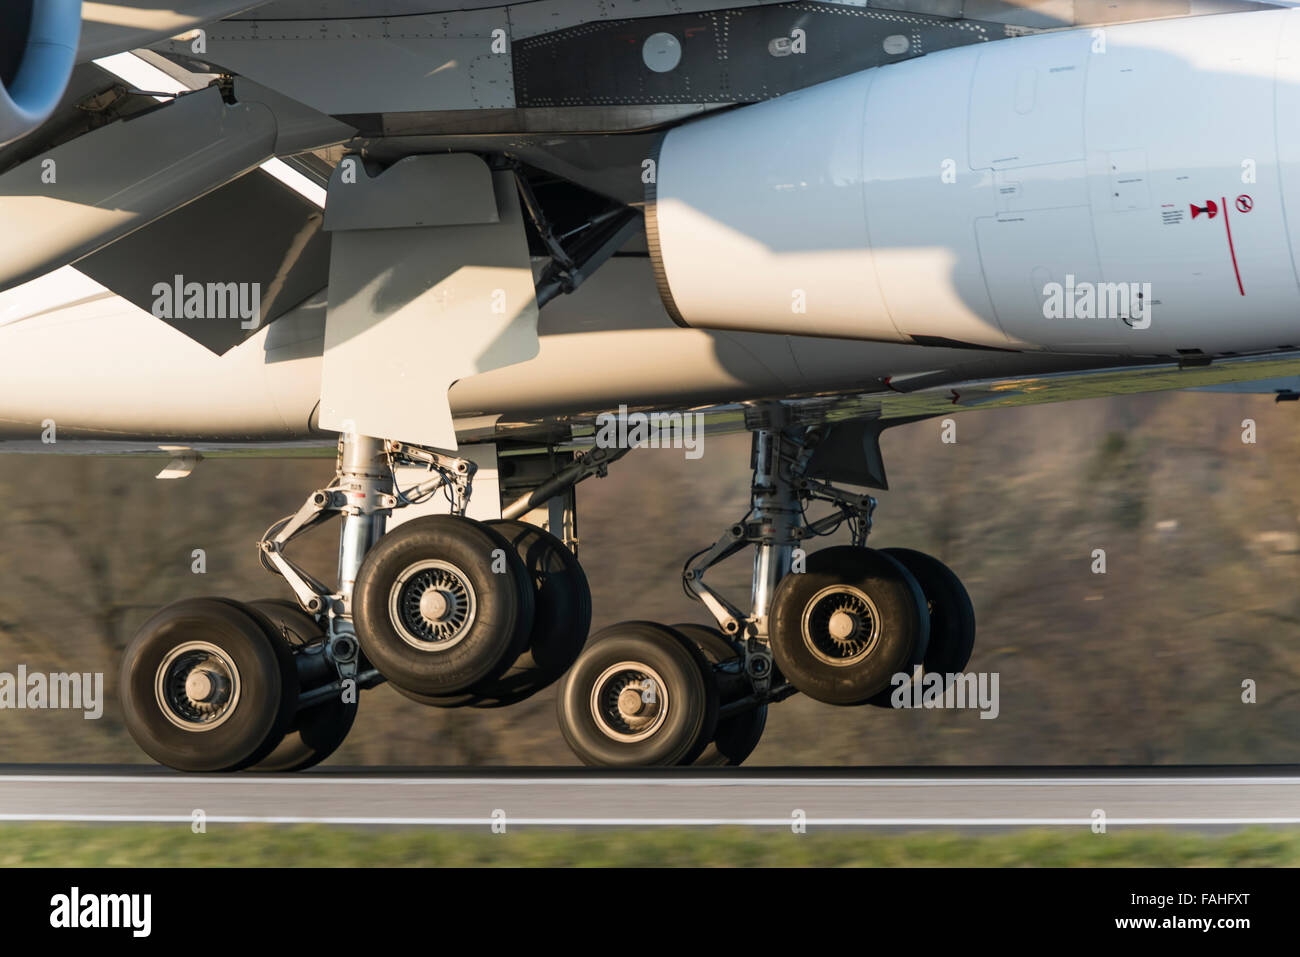 Tires of the main gear of an Airbus A340 passenger aircraft of Swiss International Air Lines are touching the ground during land Stock Photo